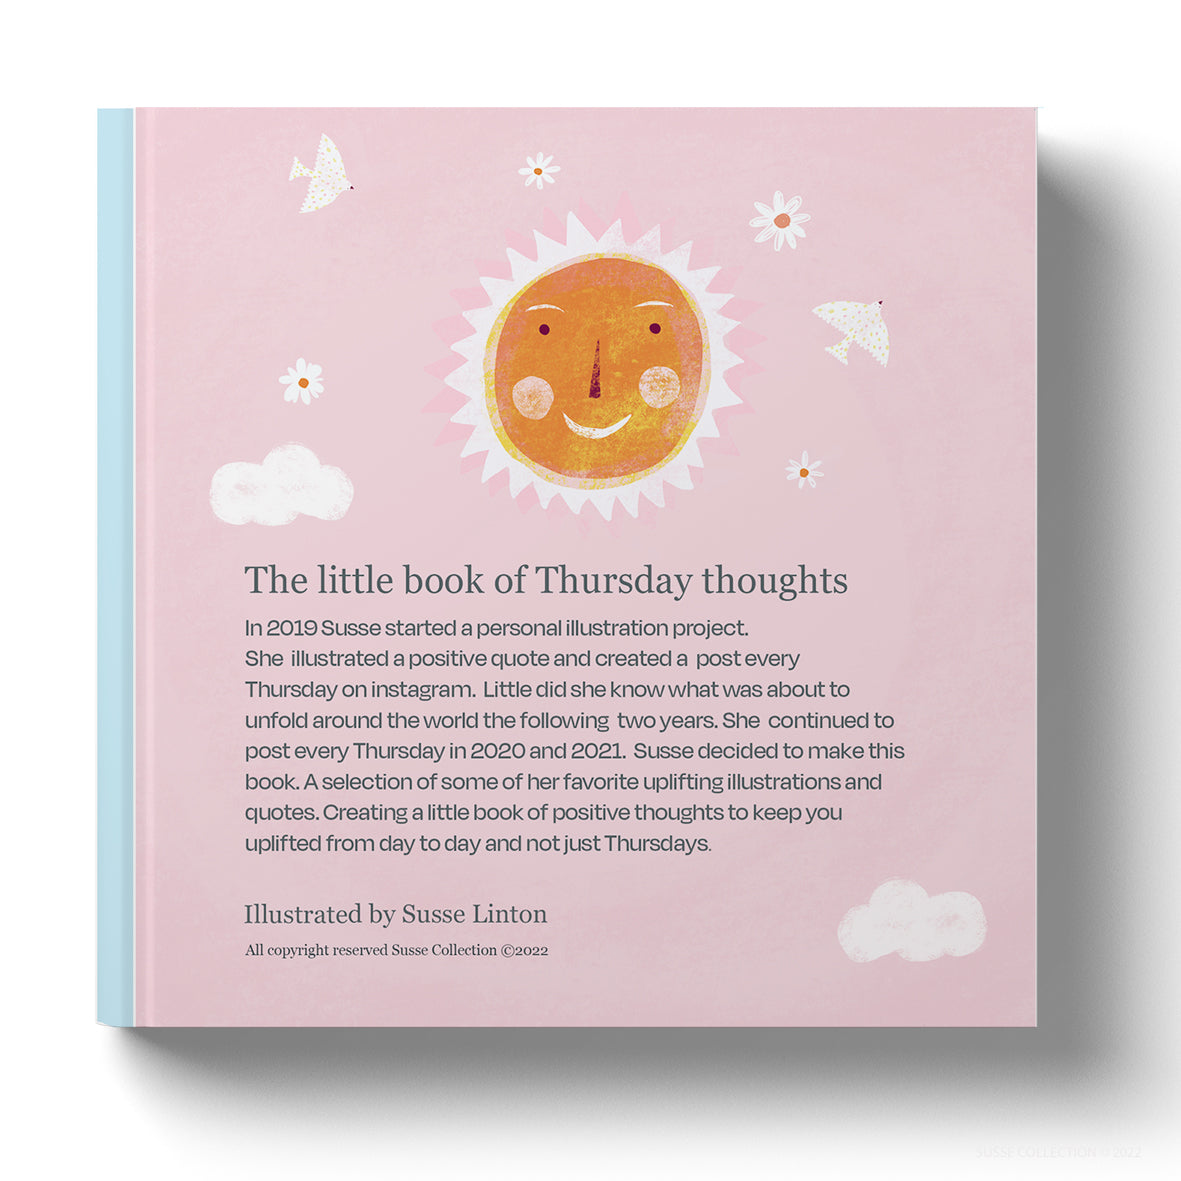 The-little -book- of -Thursday -thoughts illustrated -by- Susse- Linton - Softcover -Book-back-cover